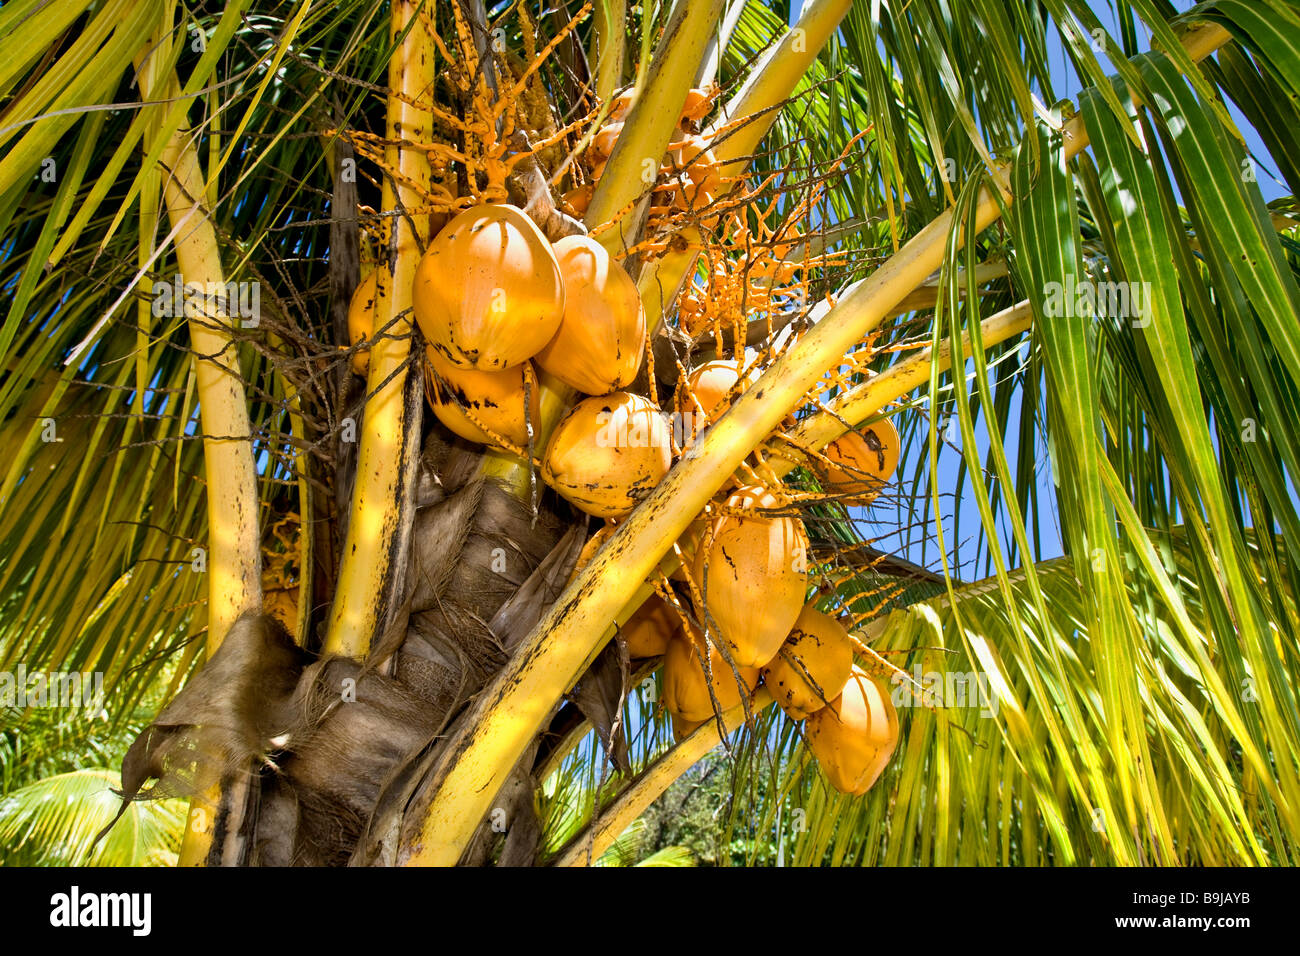 Coconuts (Cocos nucifera) hanging on a palm tree, Indonesia, Southeast Asia Stock Photo